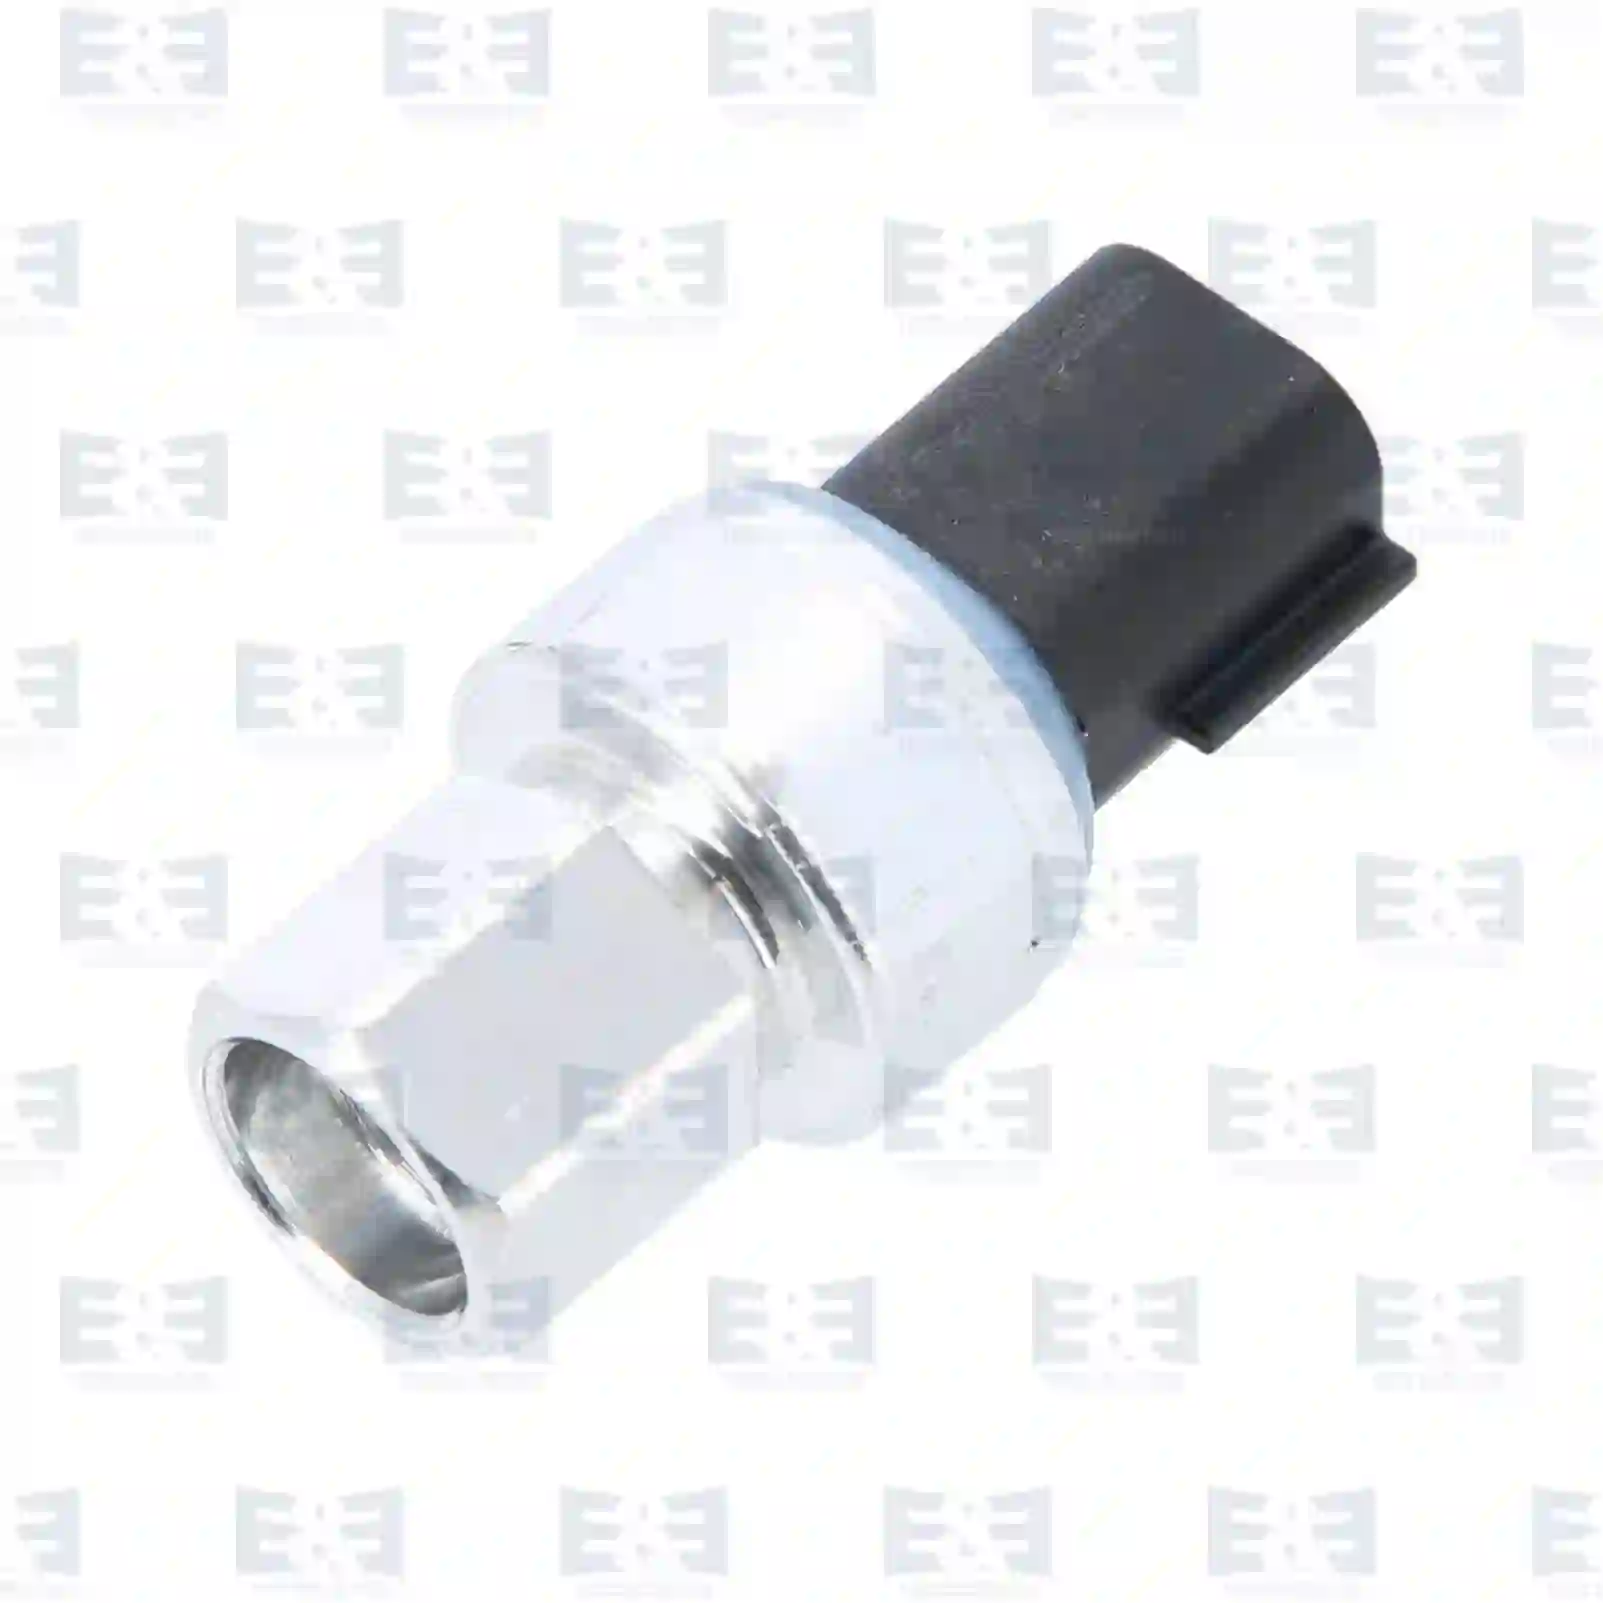 Pressure switch, air conditioning, 2E2276559, 5044586, 5471192, BT43-19D594-AA, HG1A-19D594-AA ||  2E2276559 E&E Truck Spare Parts | Truck Spare Parts, Auotomotive Spare Parts Pressure switch, air conditioning, 2E2276559, 5044586, 5471192, BT43-19D594-AA, HG1A-19D594-AA ||  2E2276559 E&E Truck Spare Parts | Truck Spare Parts, Auotomotive Spare Parts